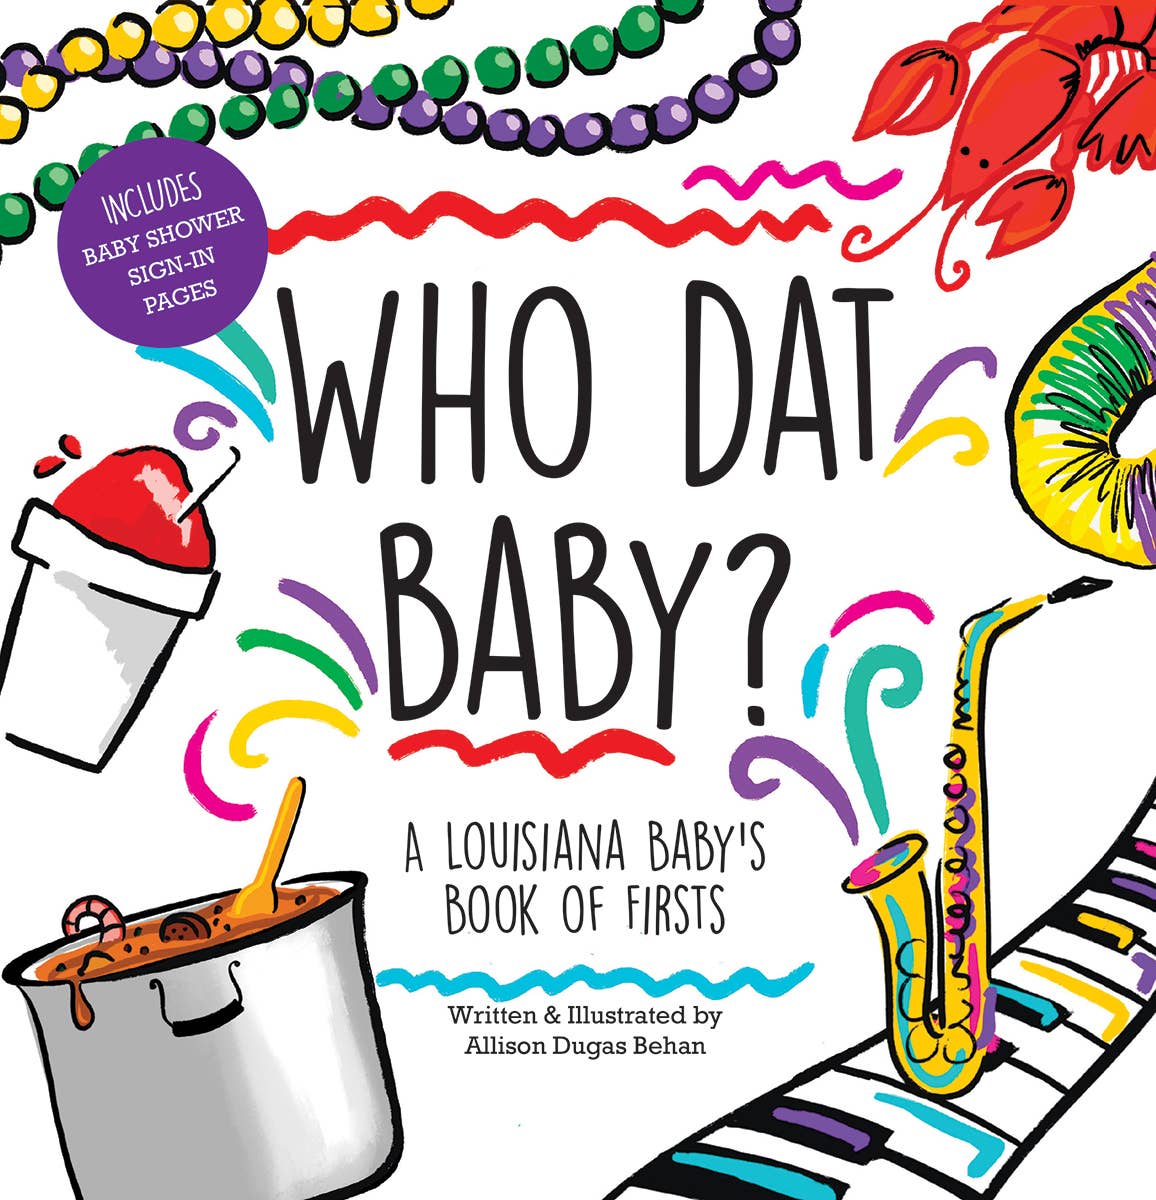 Who Dat Baby? A Louisiana Baby's Book of Firsts